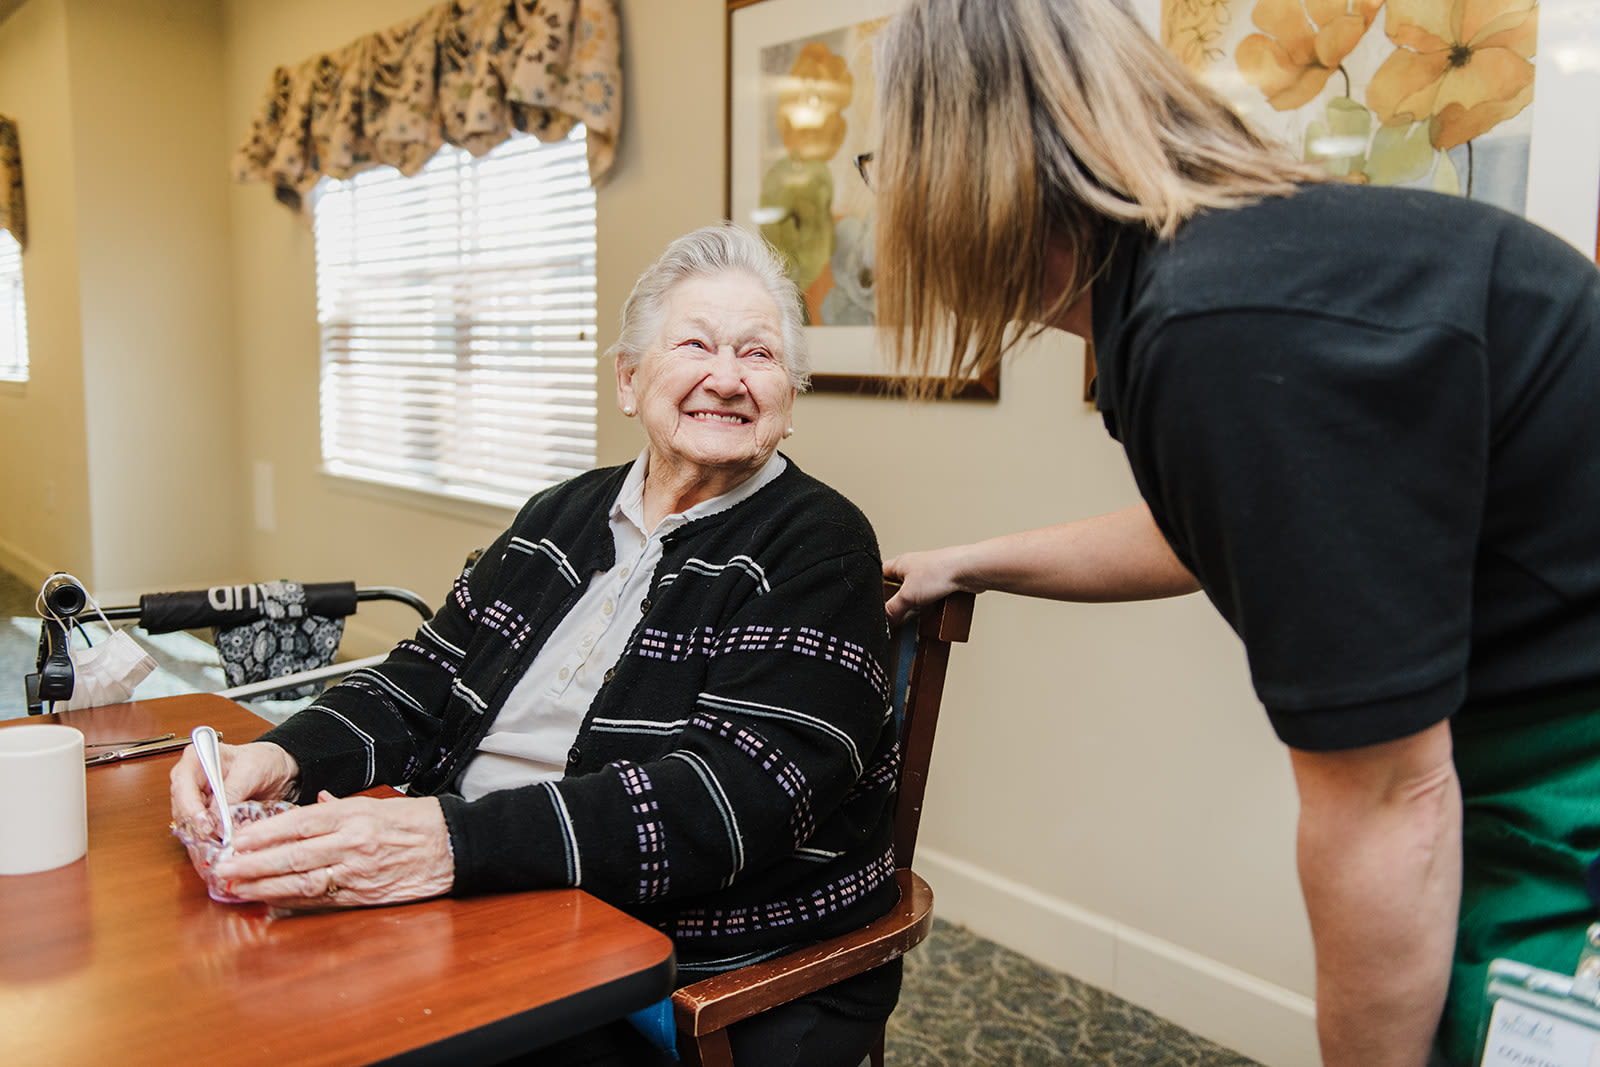 Caretaker talking to a resident at English Meadows Conway Campus in Conway, South Carolina